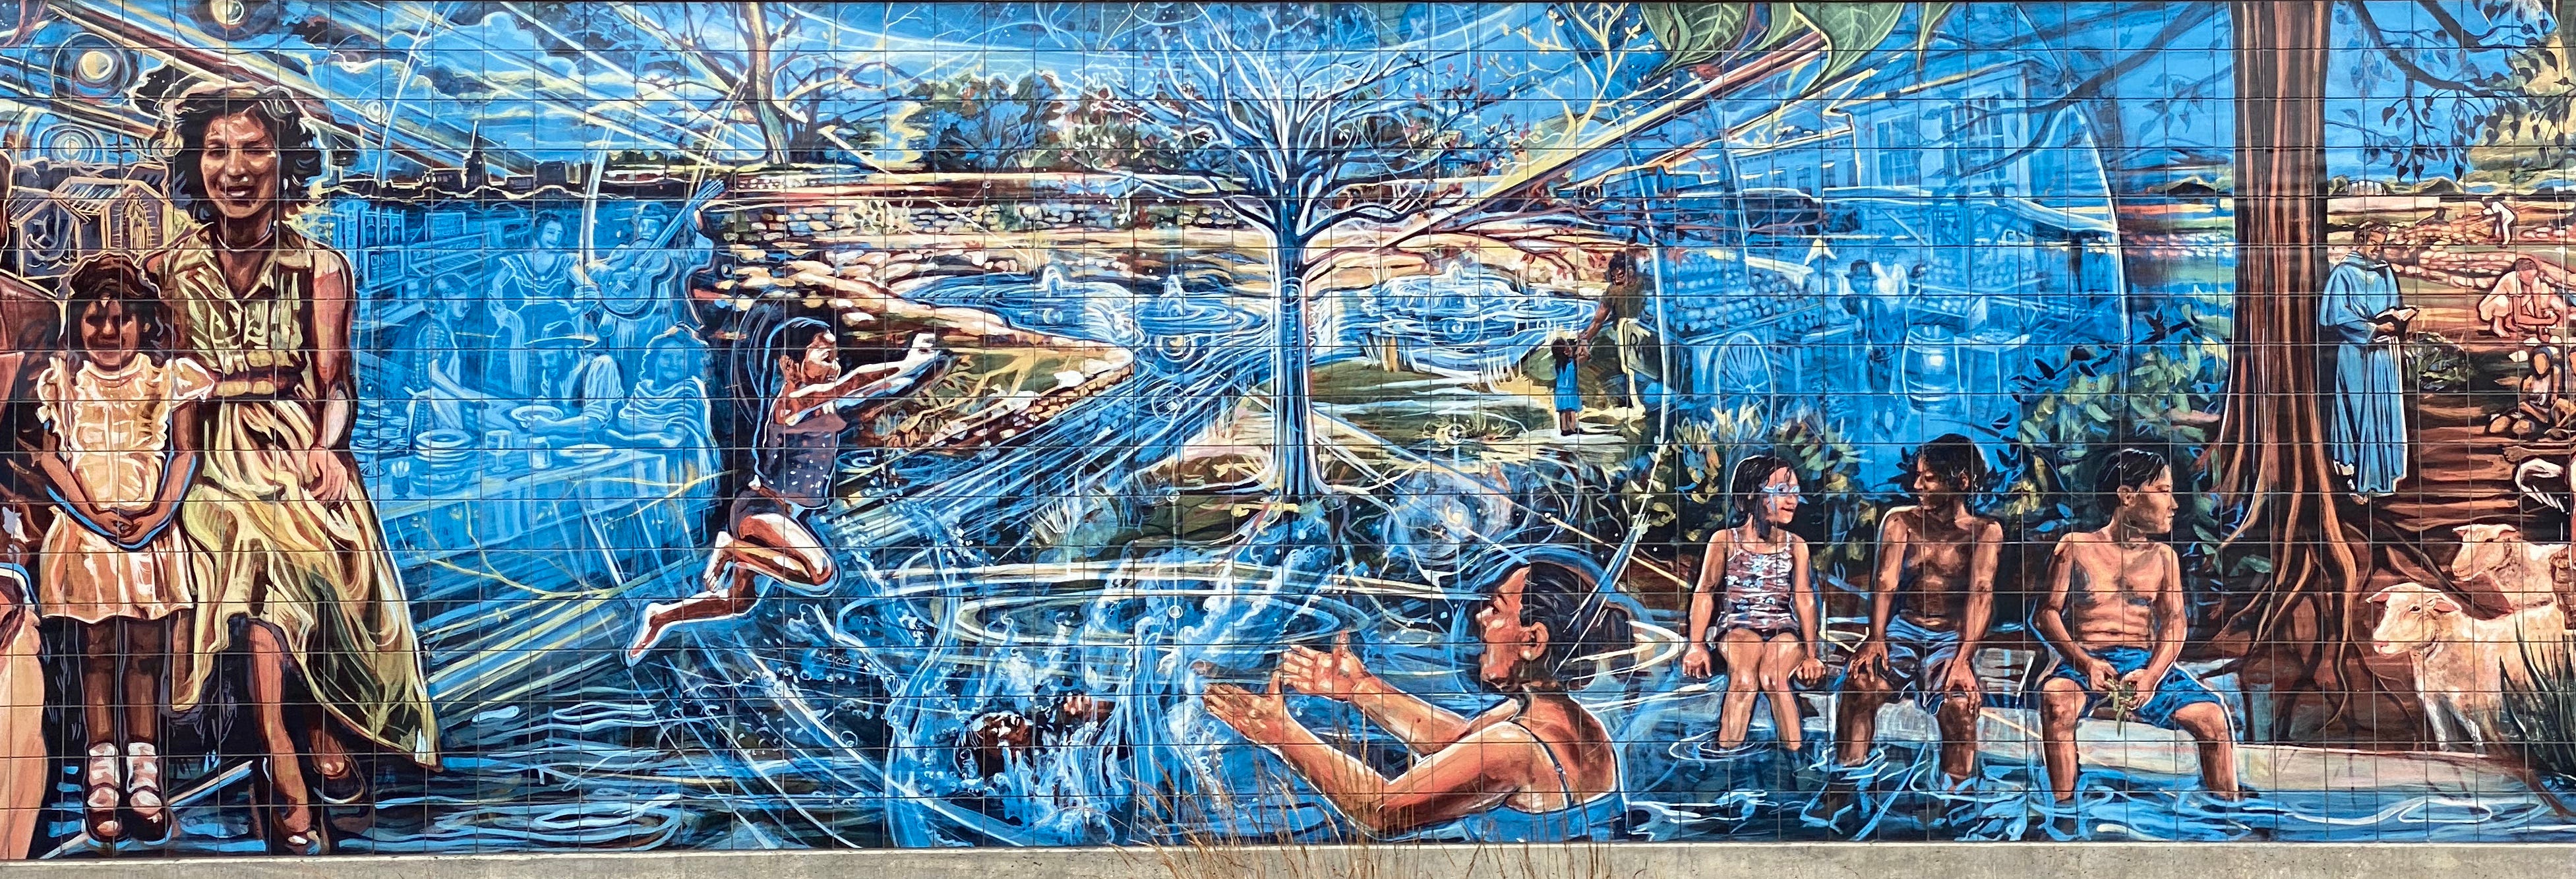 The tradition of Mexican mural art in San Antonio